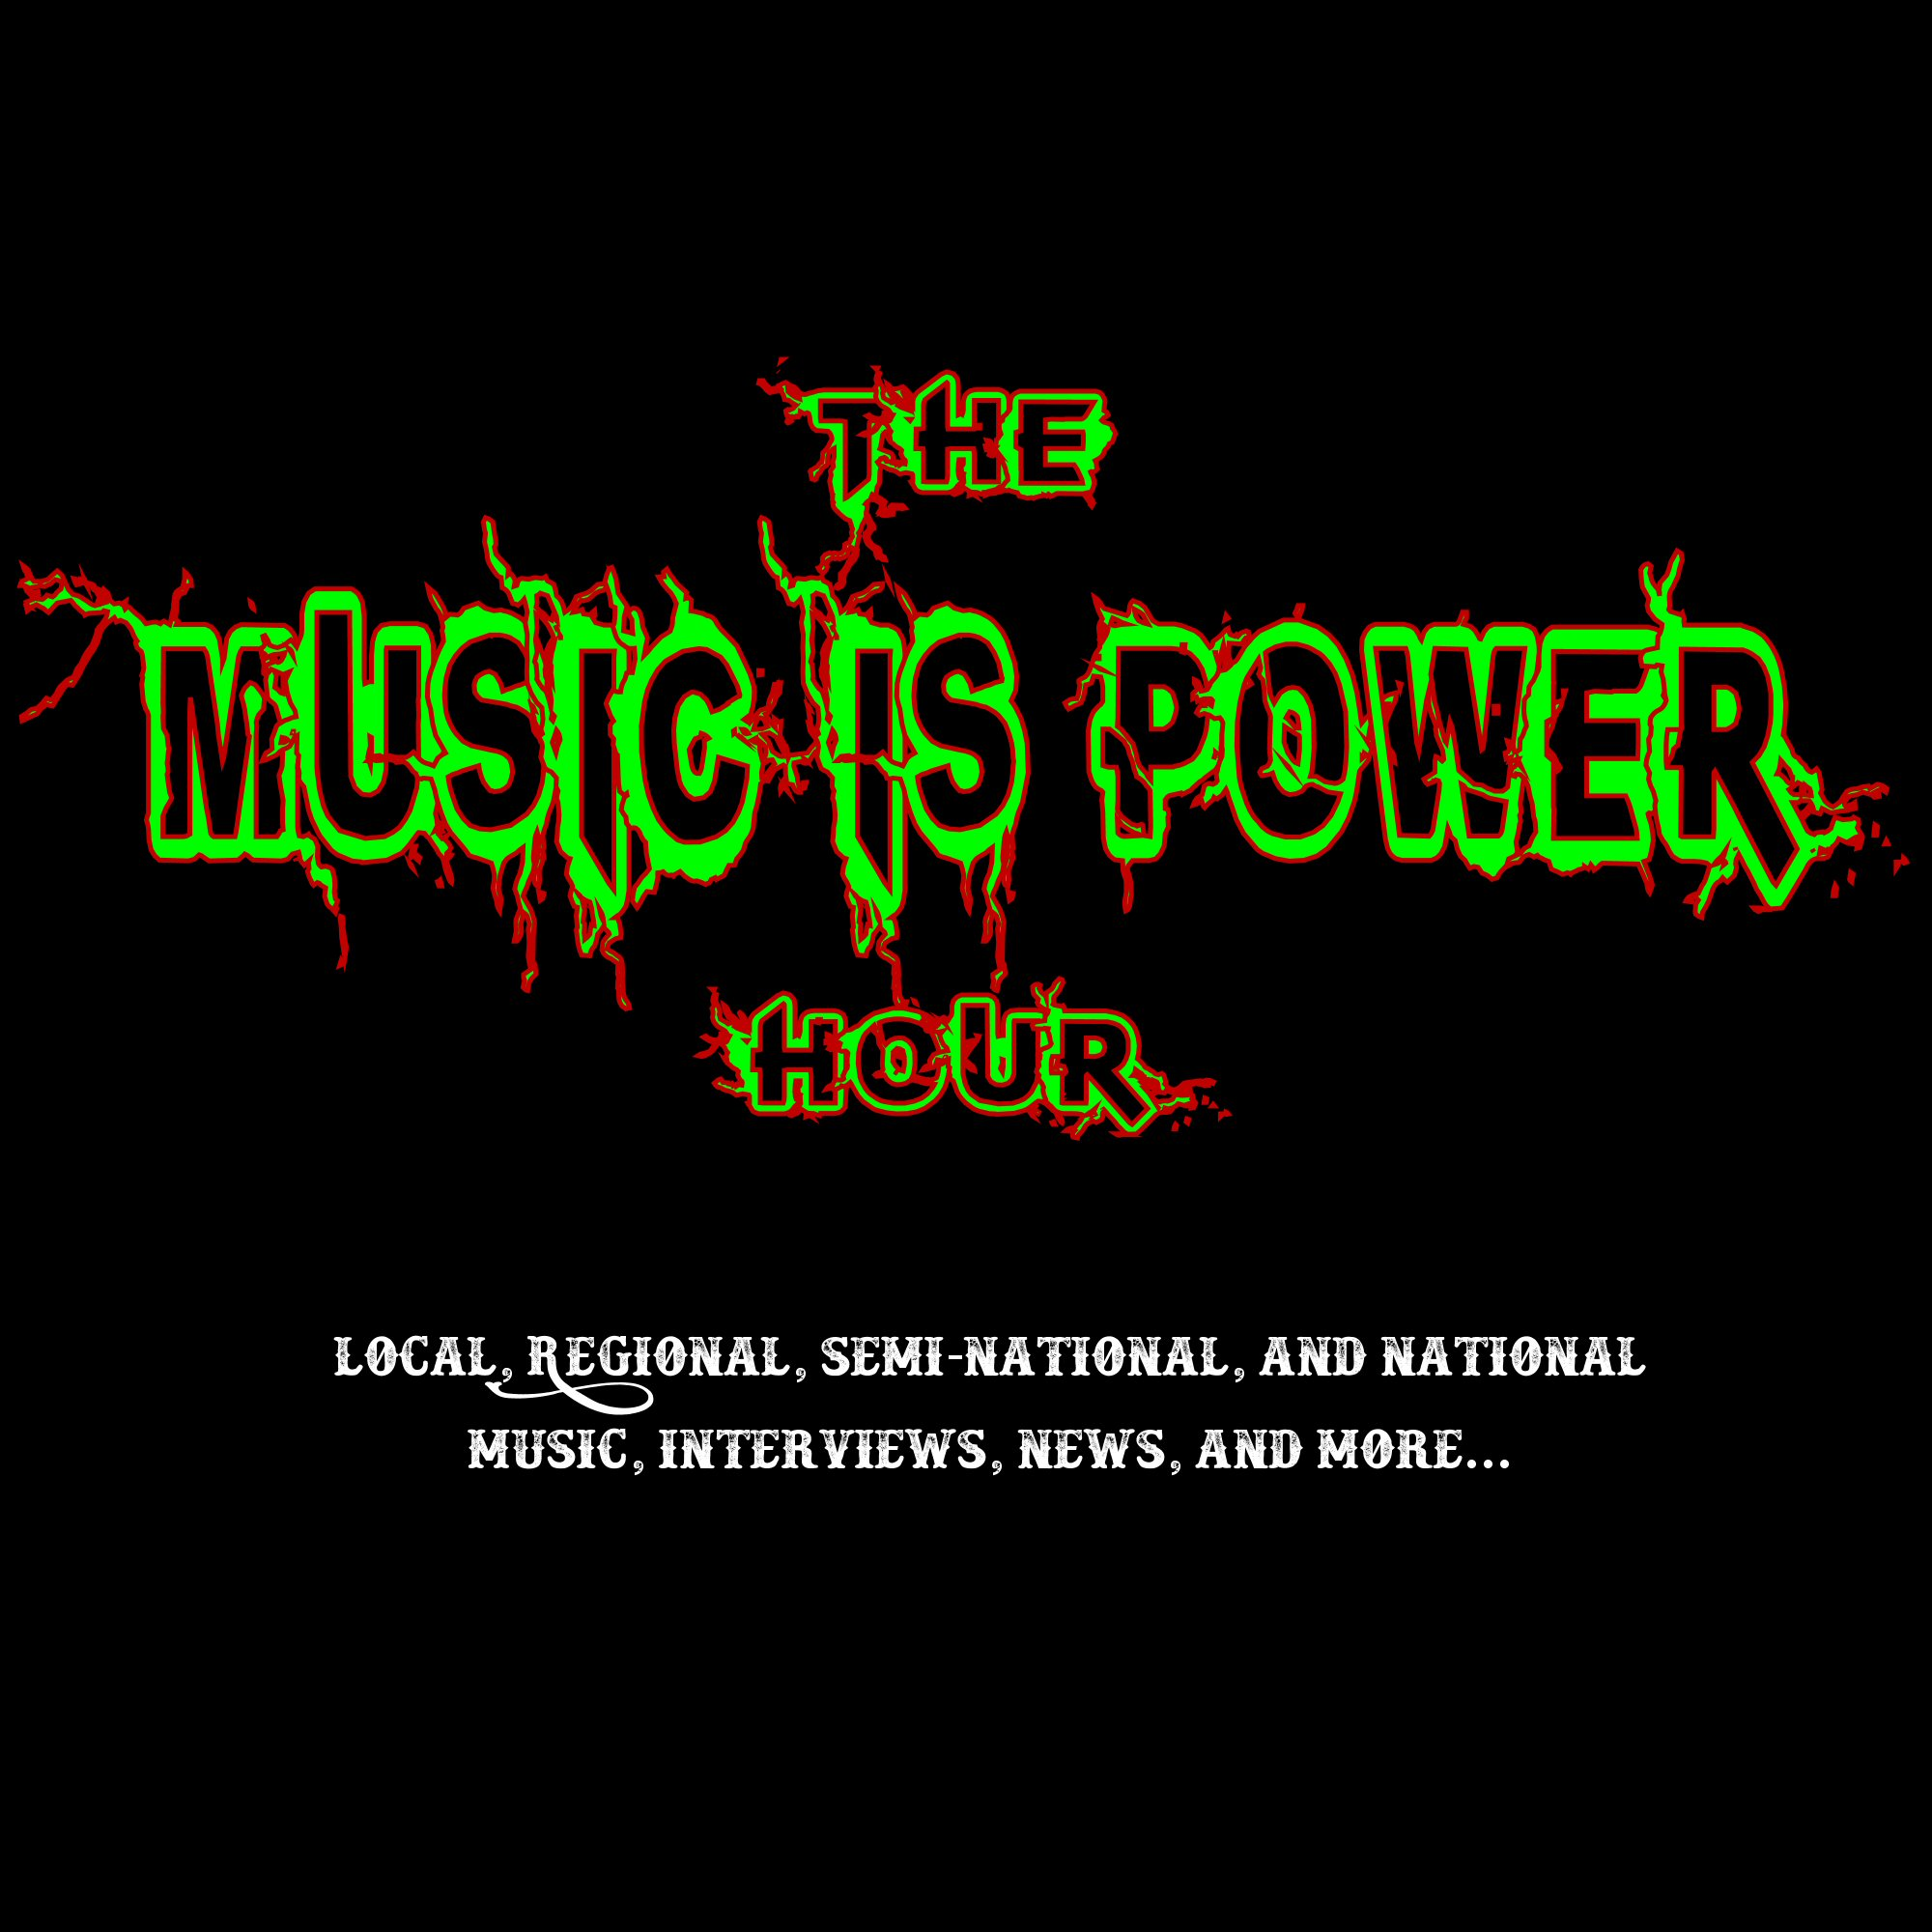 The MUSIC Is POWER Hour